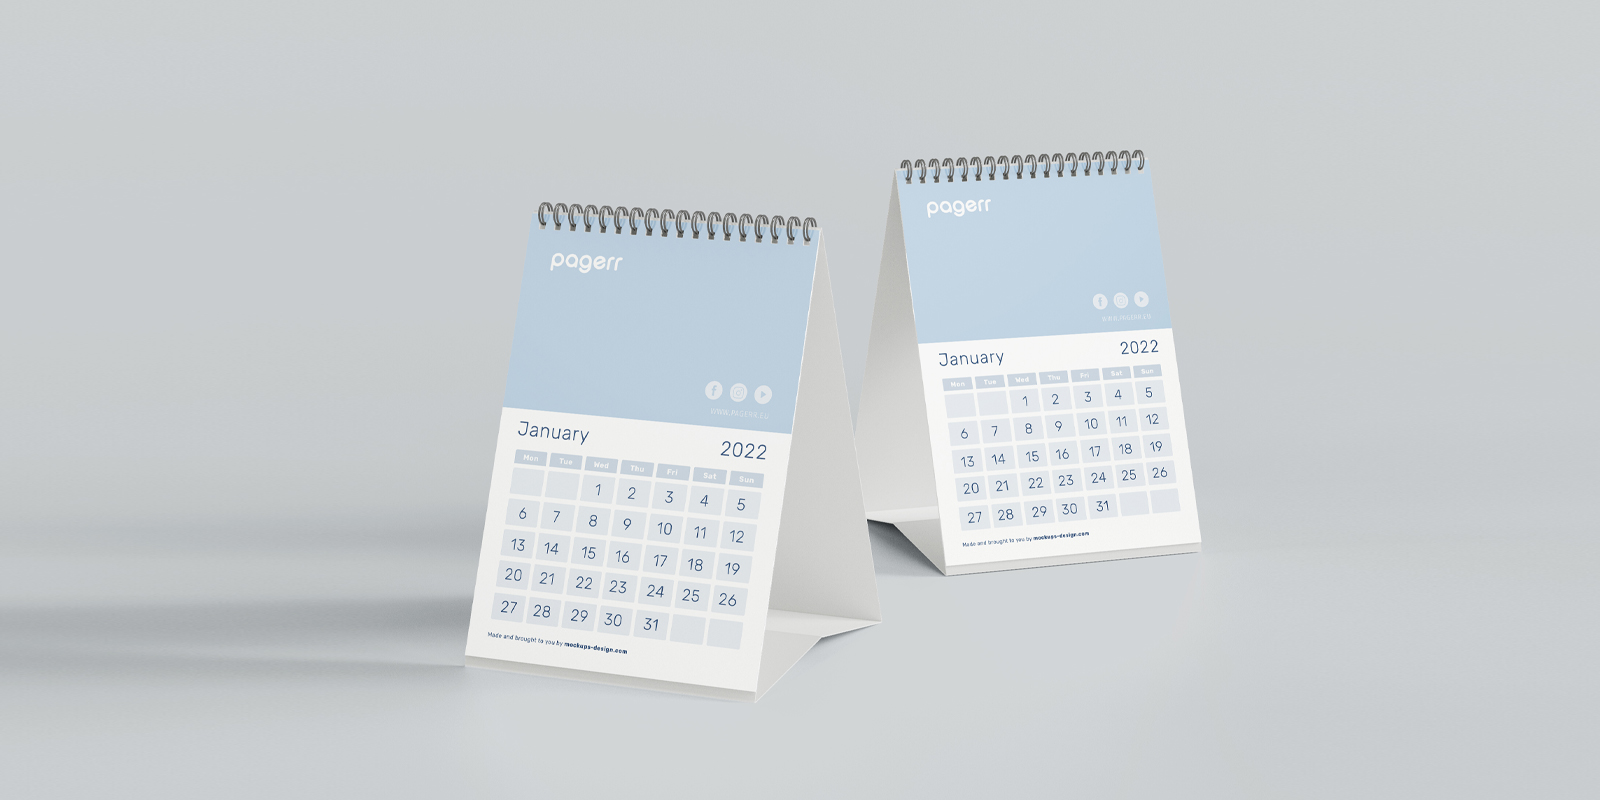 Desk calendars in Canberra - Print with Pagerr